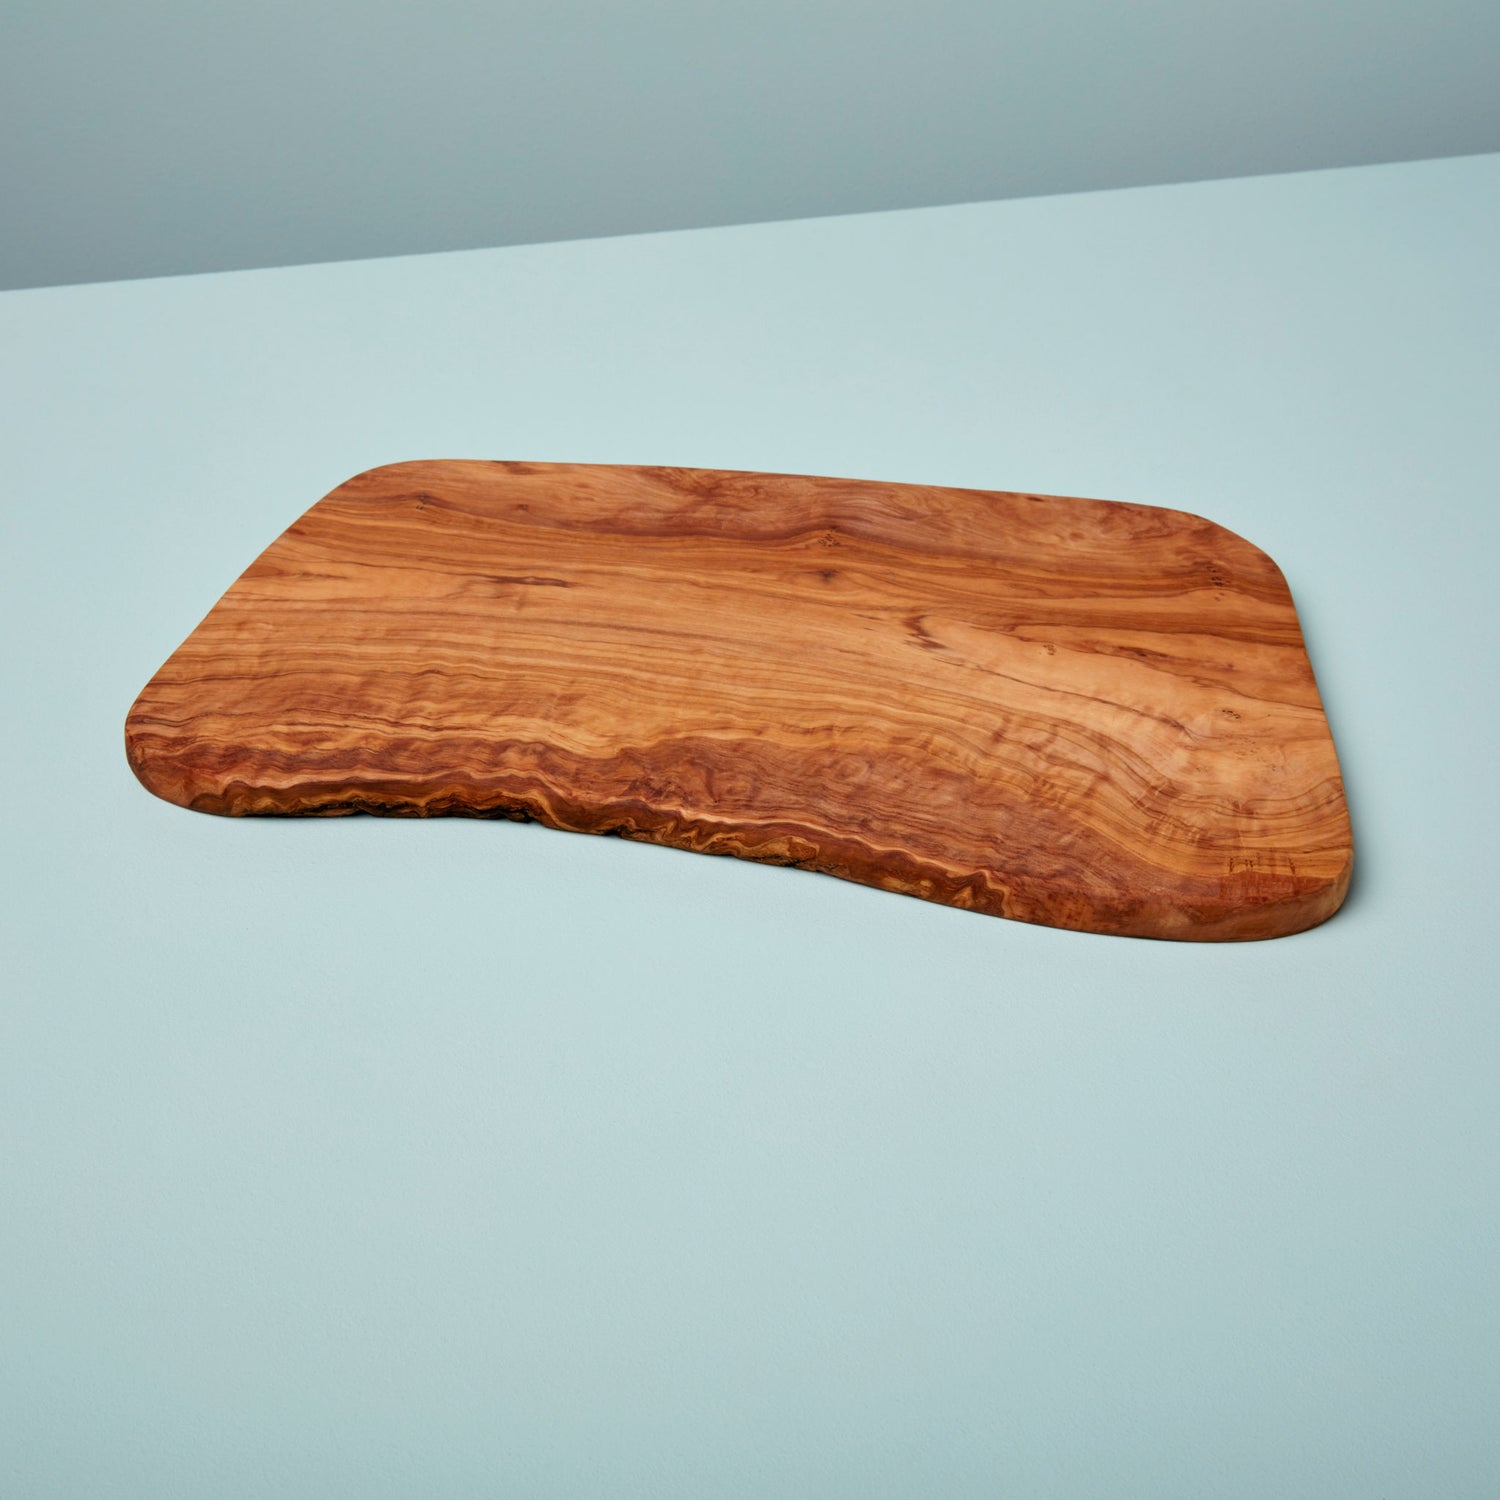 https://behome.com/cdn/shop/products/Be-Home_Organic-Olive-Wood-Board-Small_50-26.jpg?v=1607486211&width=1500